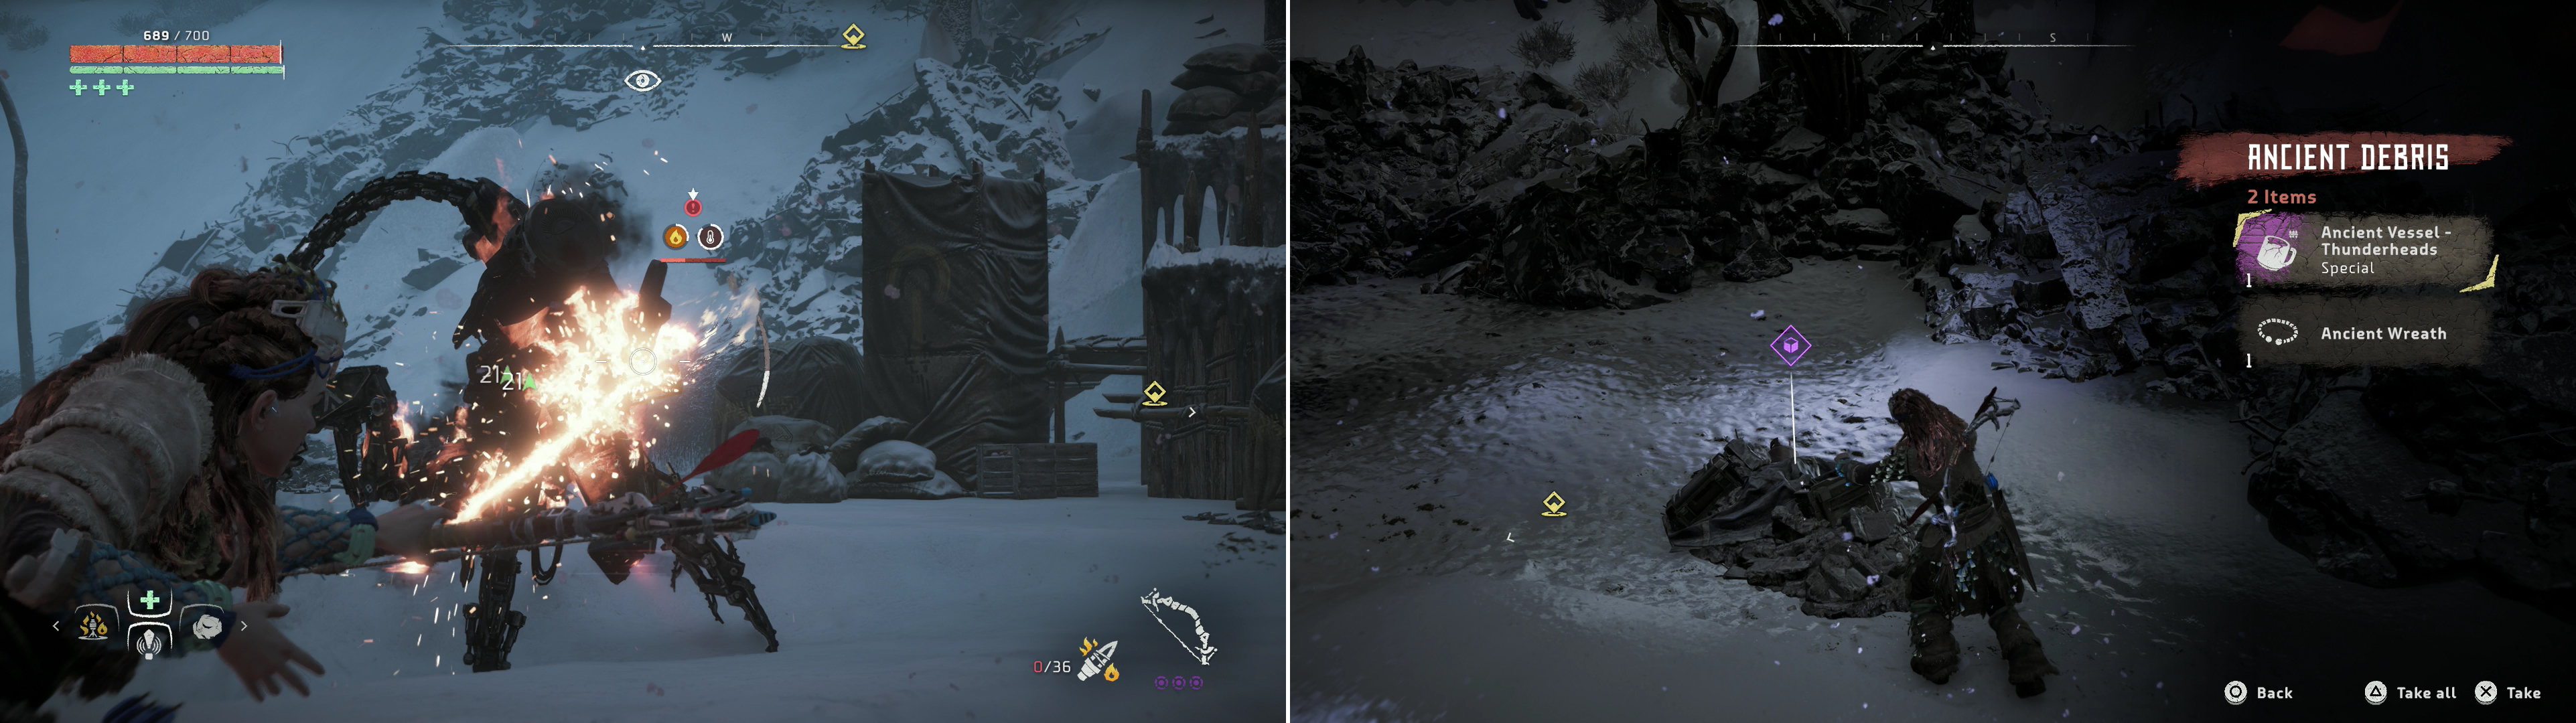 A Corruptor is the most dangerous foe lurking on the outskirts of the ruins (left). On your way through the ruins pluck the Ancient Vessel - Thunderheads out of a pile of Ancient Debris (right).